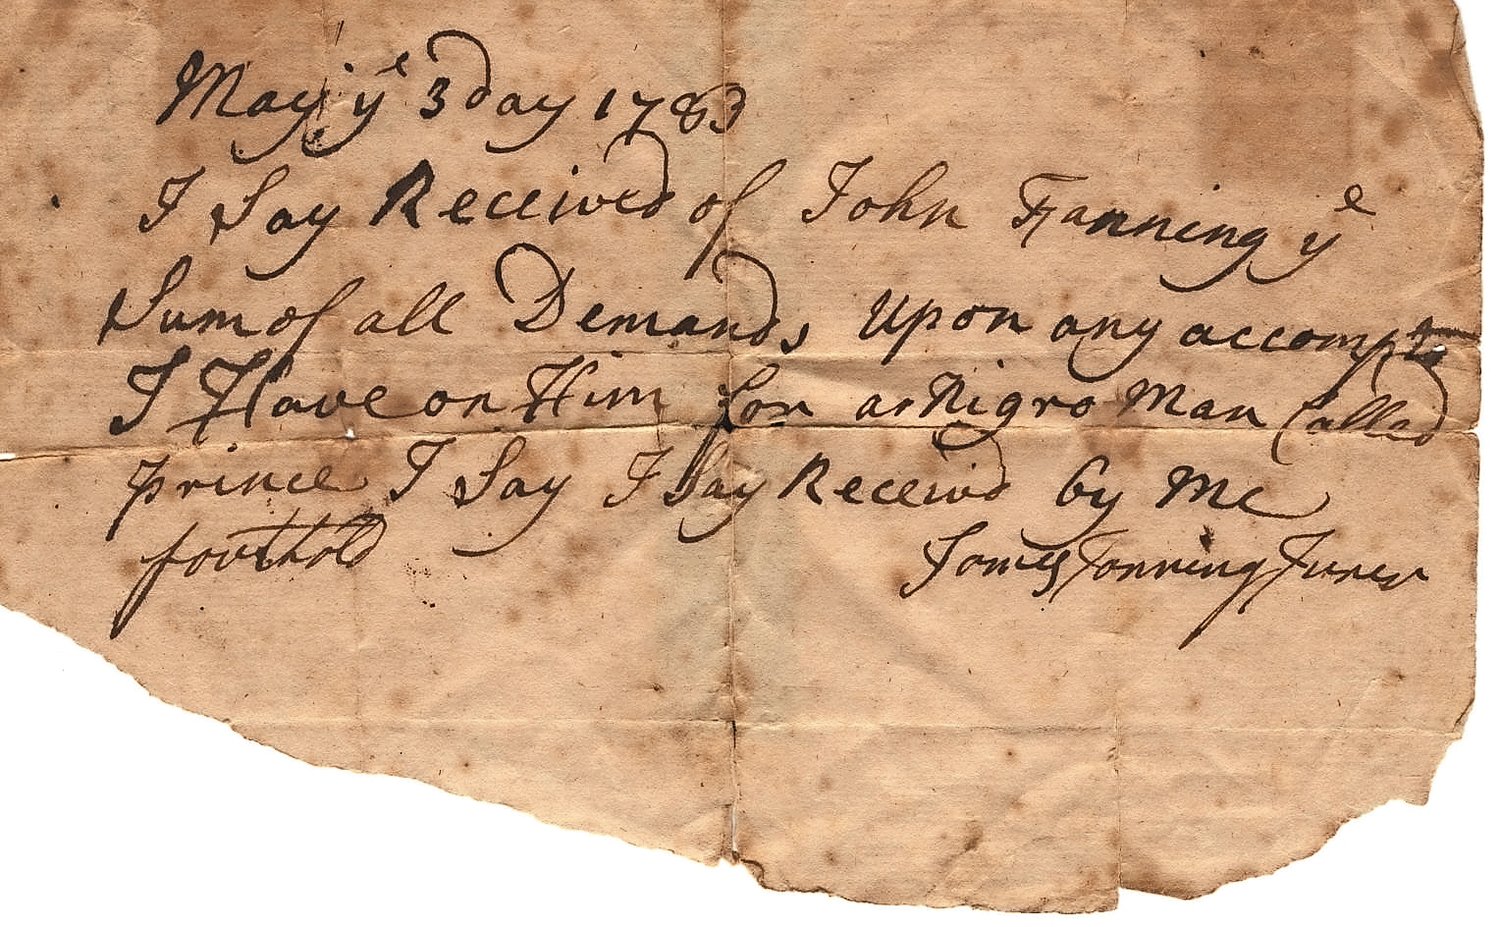 A receipt for the sale of a slave on Long Island in 1783